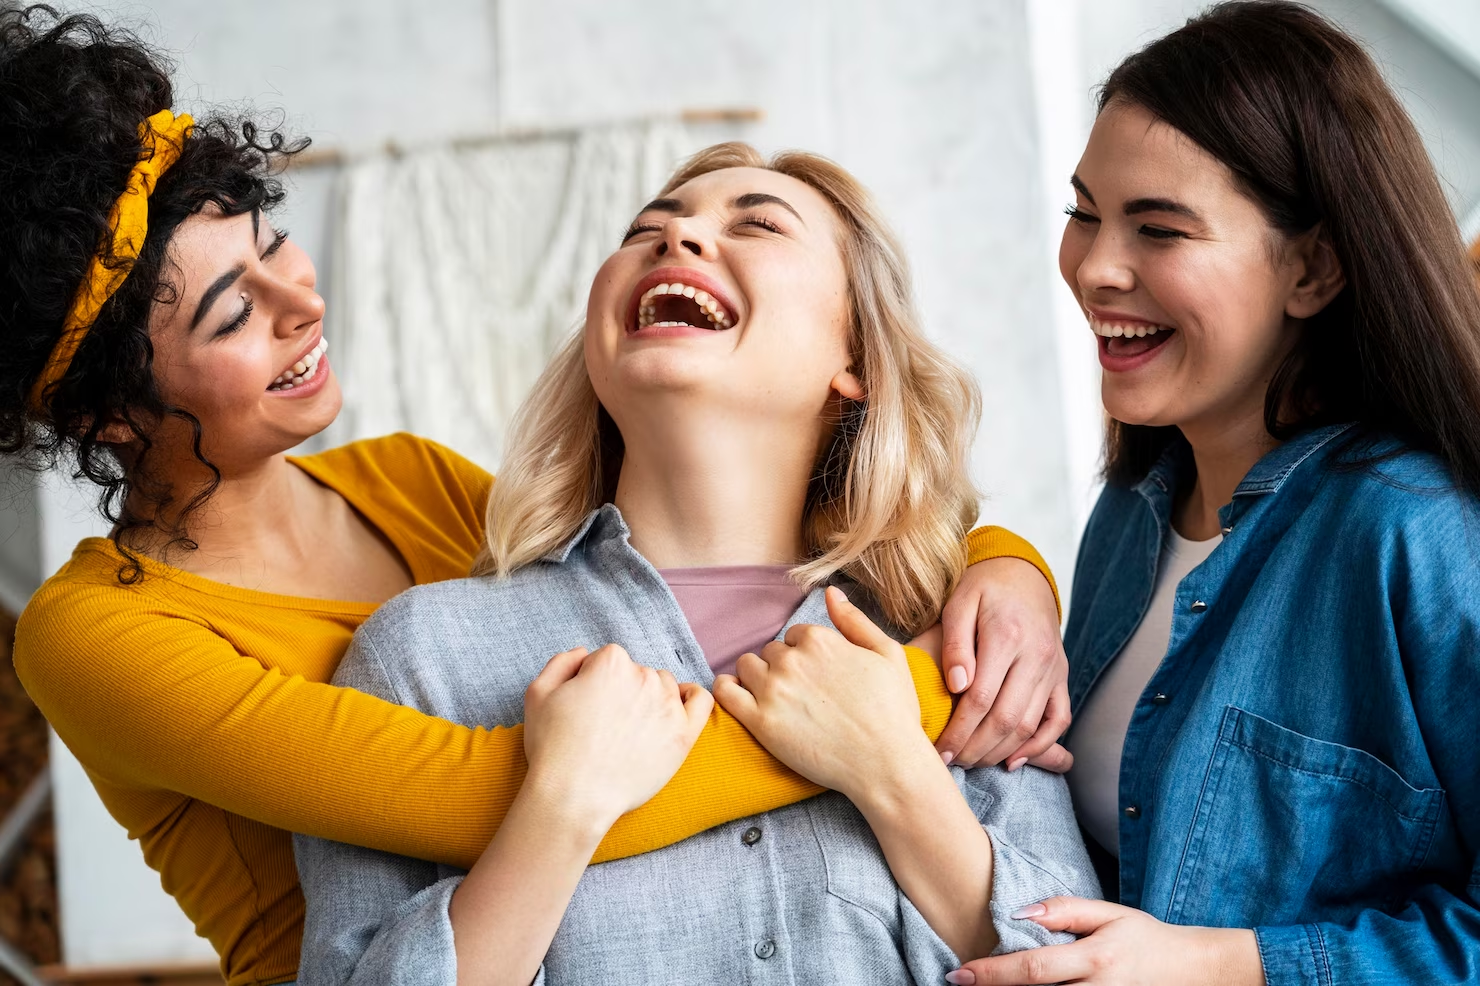 Three women laughing together discussing funny meme captions.